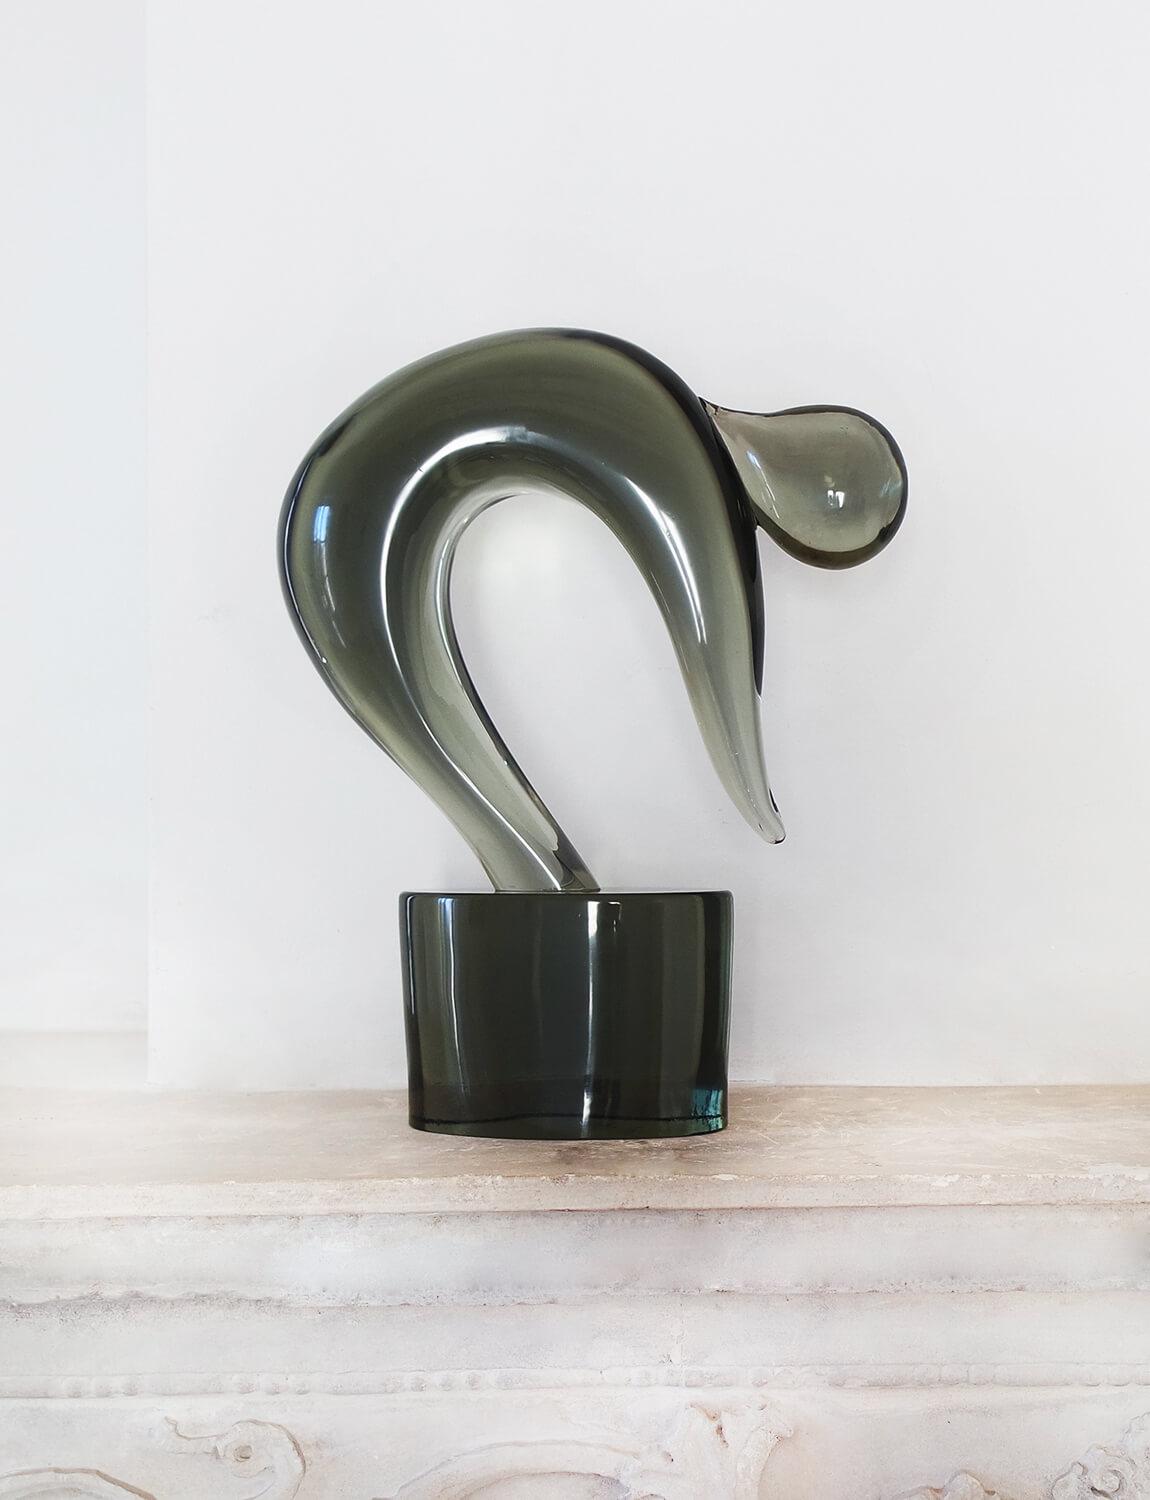 Il Tuffatore is an important hand blown Murano glass sculpture by Loredano Rosin (1936-1992). Il Tuffatore, literally translated as, 'The Diver' is a Murano glass sculpture in deep grey. It depicts a modernist figure with its head down in a diving